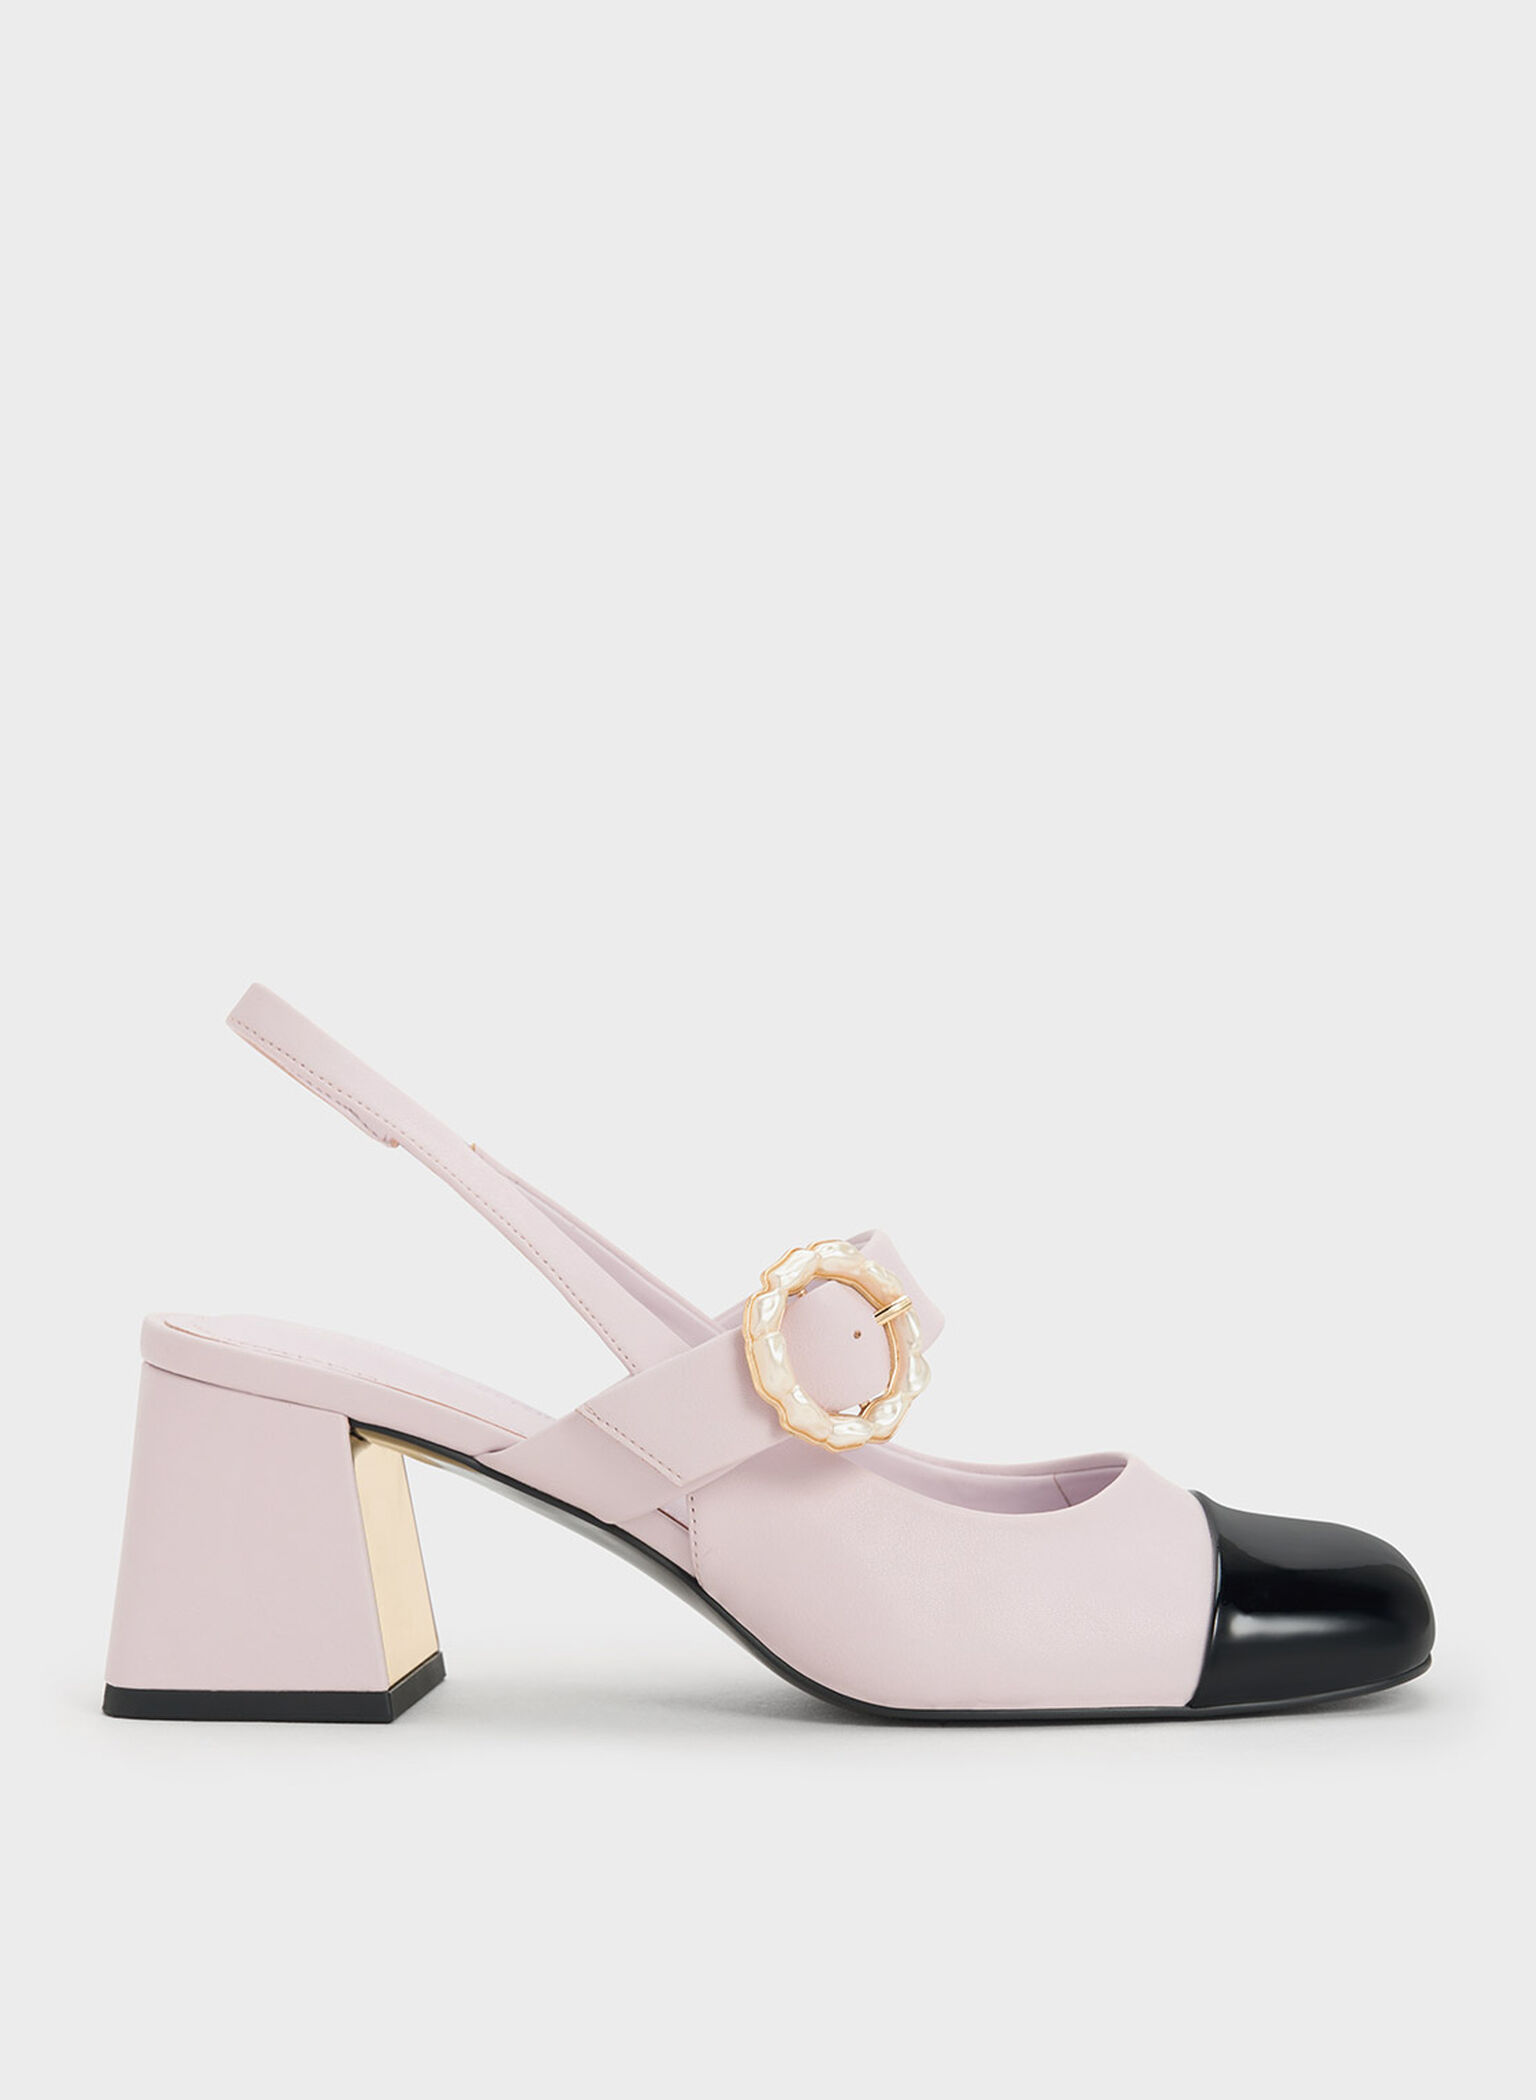 Patent Two-Tone Pearl Buckle Slingback Pumps, Lilac, hi-res